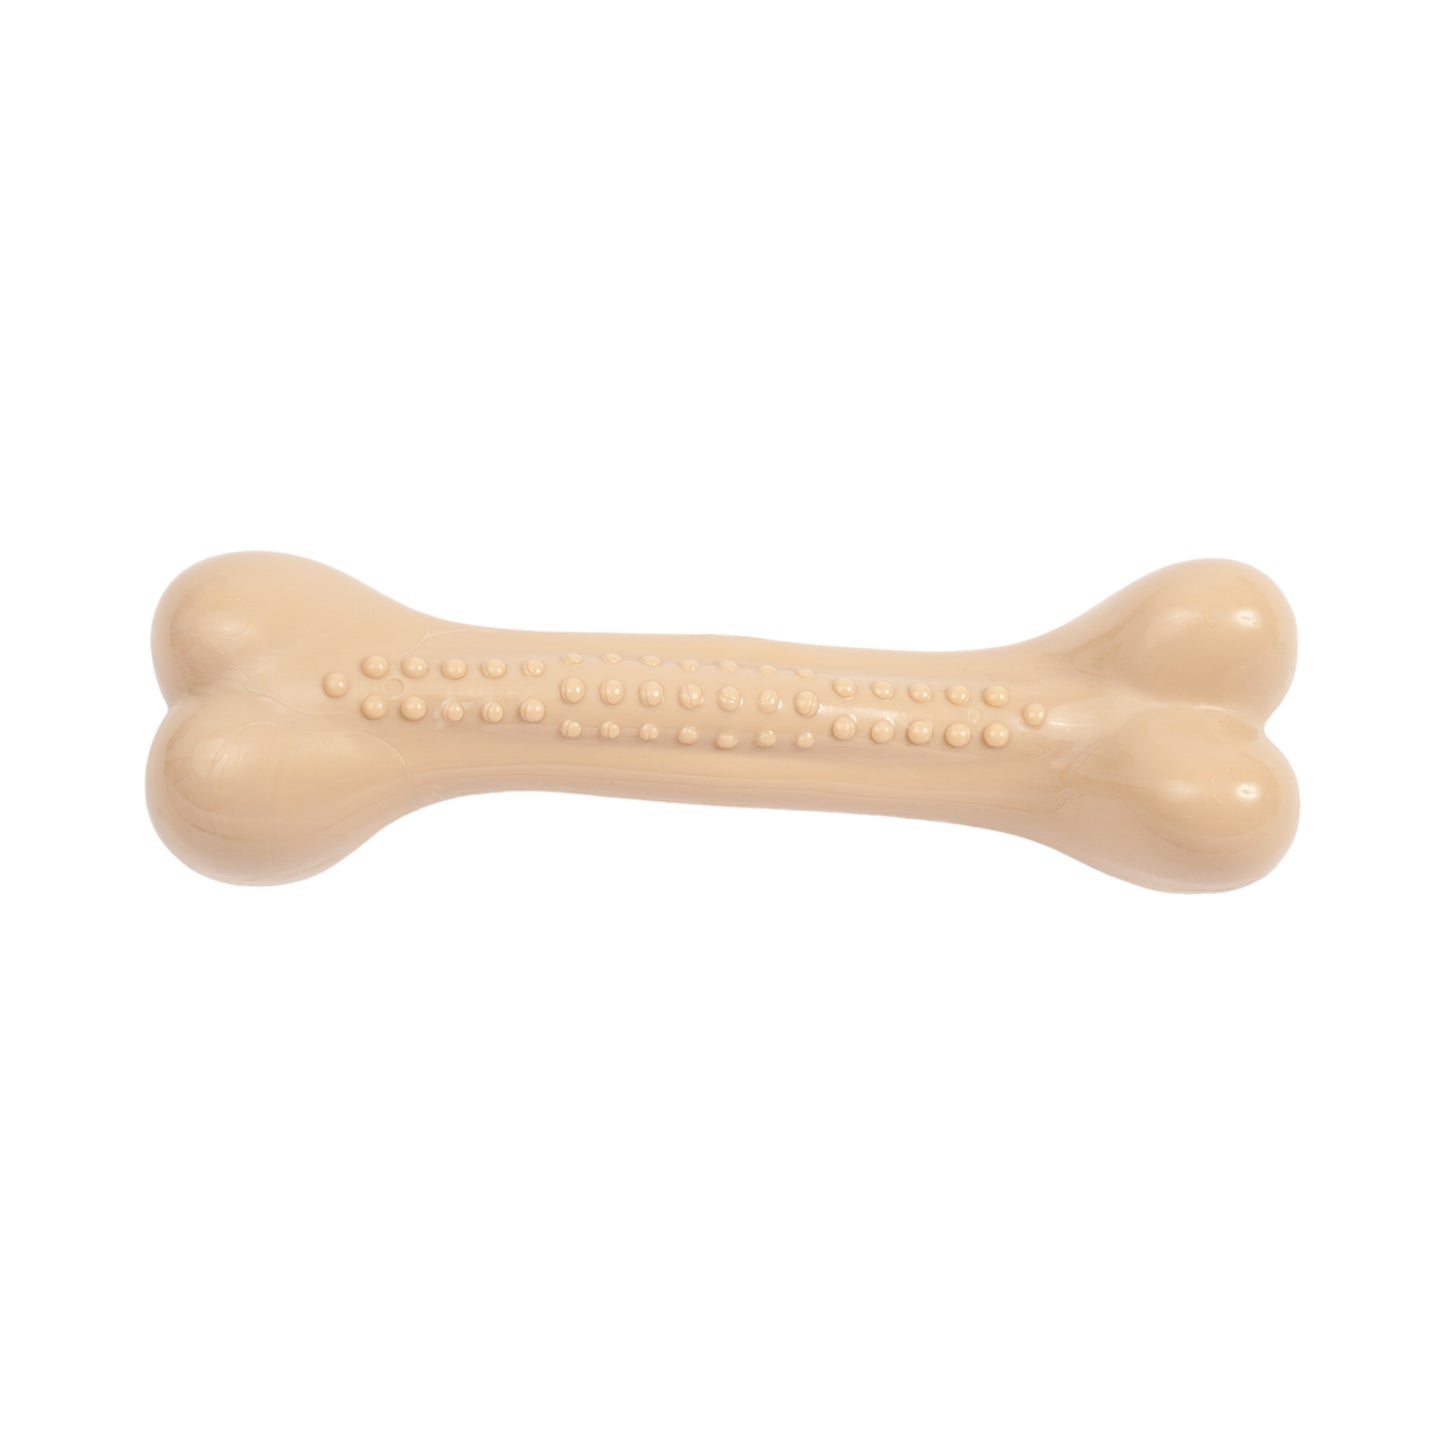 Country Living Nylon Chew Dog Bone Toy - Chicken Flavored